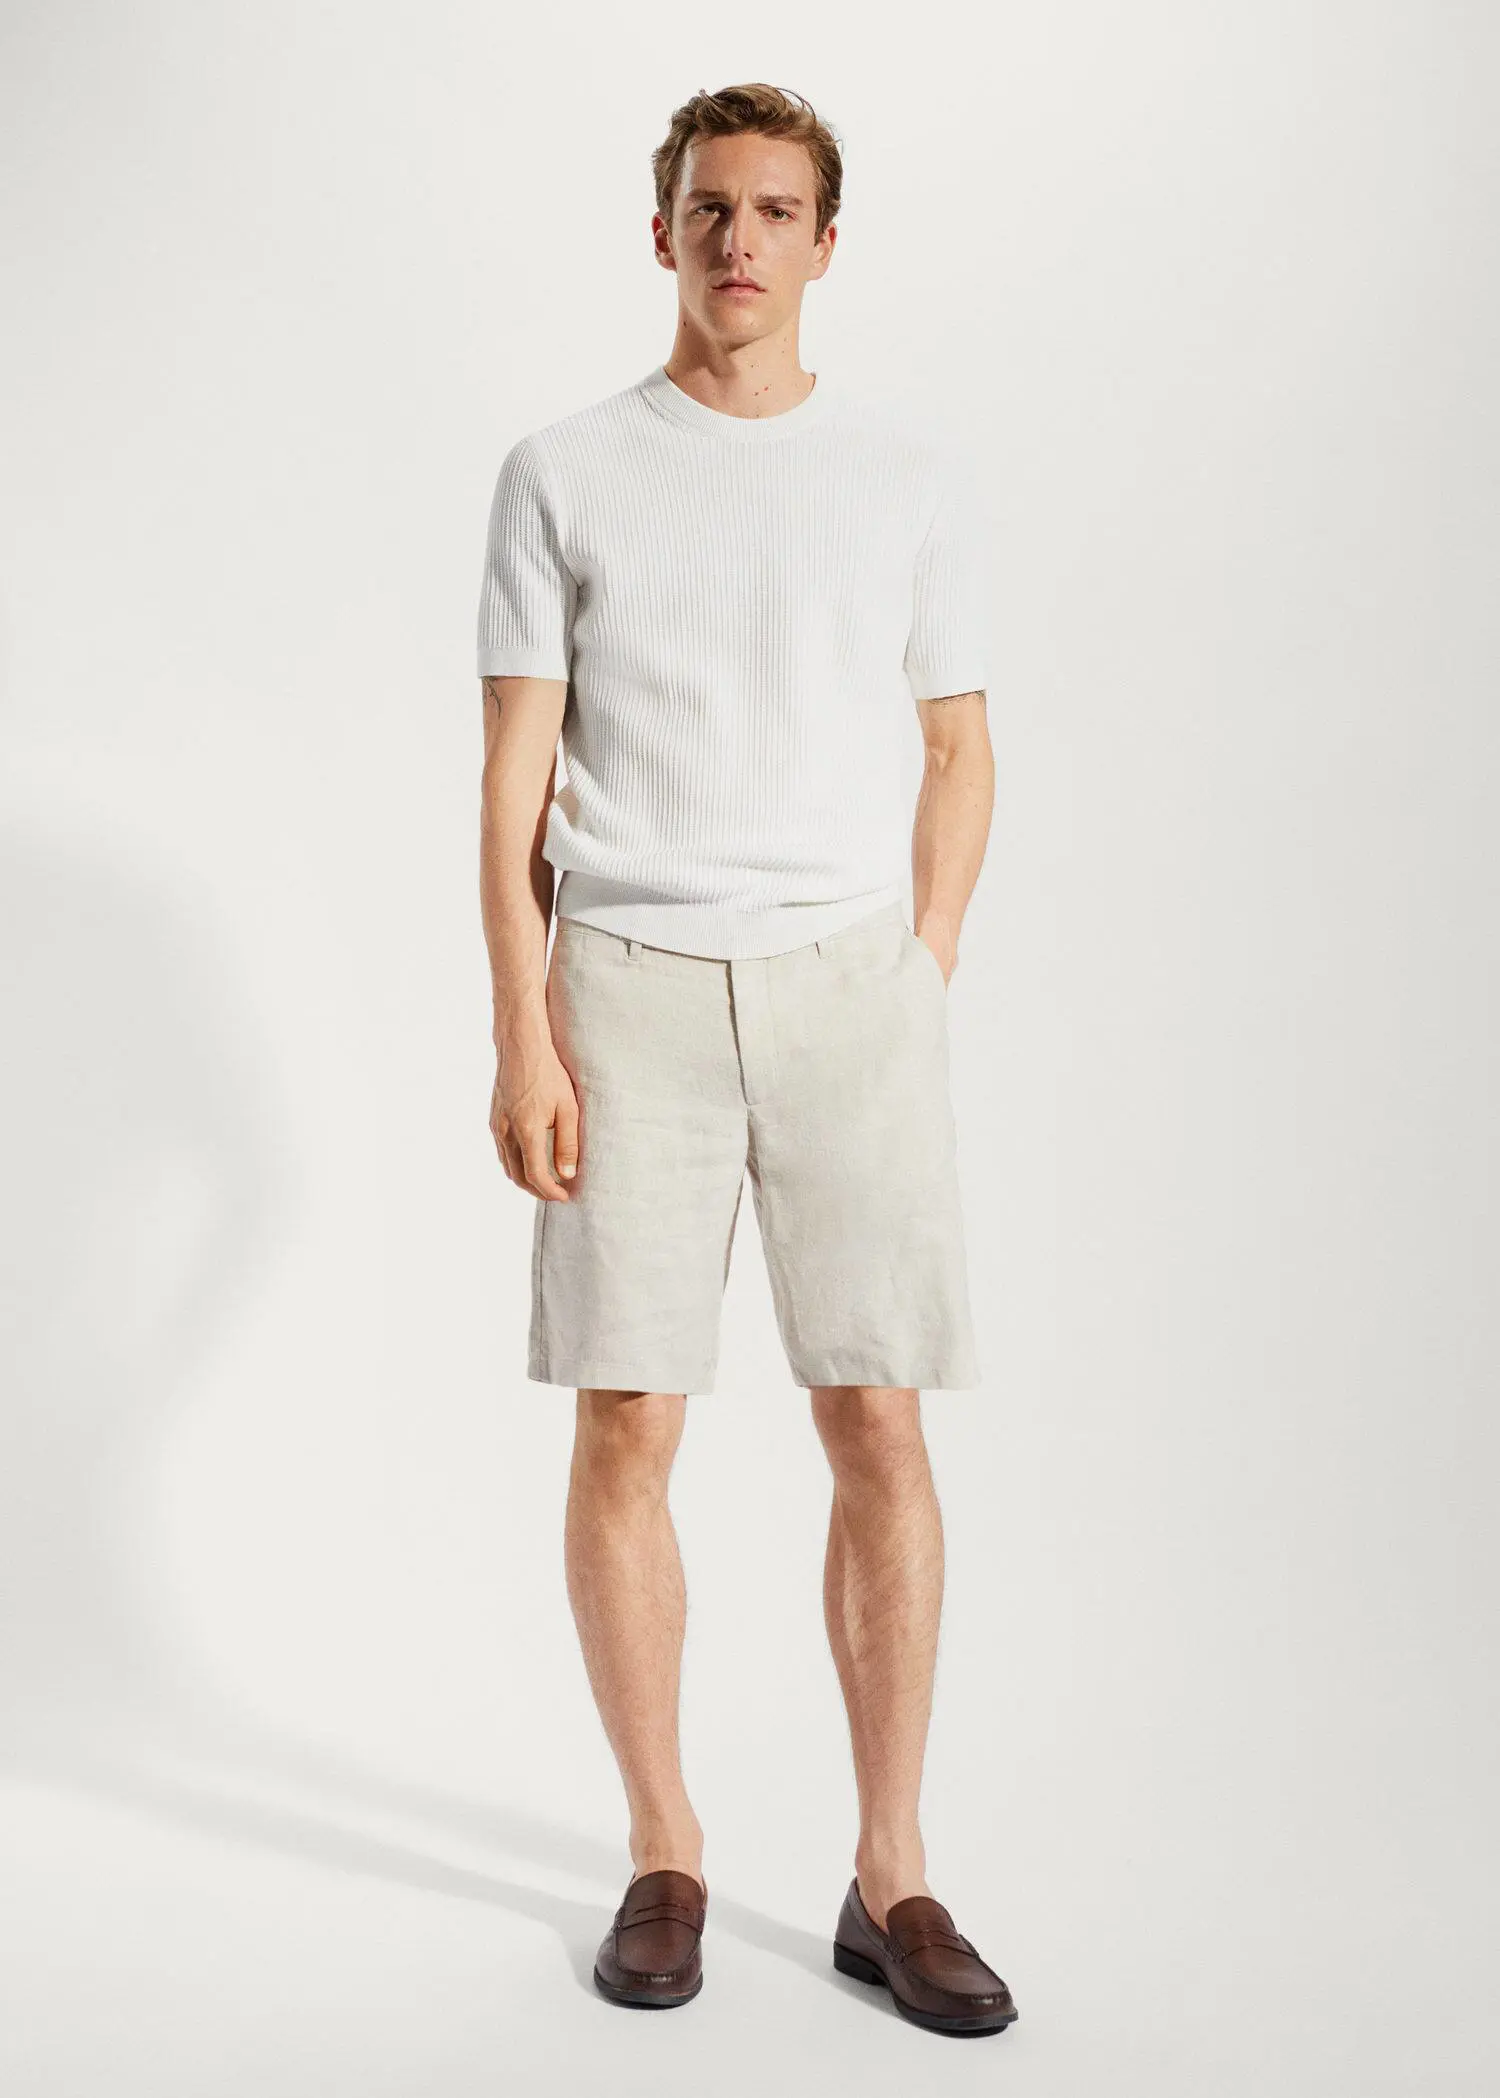 Mango 100% linen shorts. a man in white shirt and shorts standing in a room. 